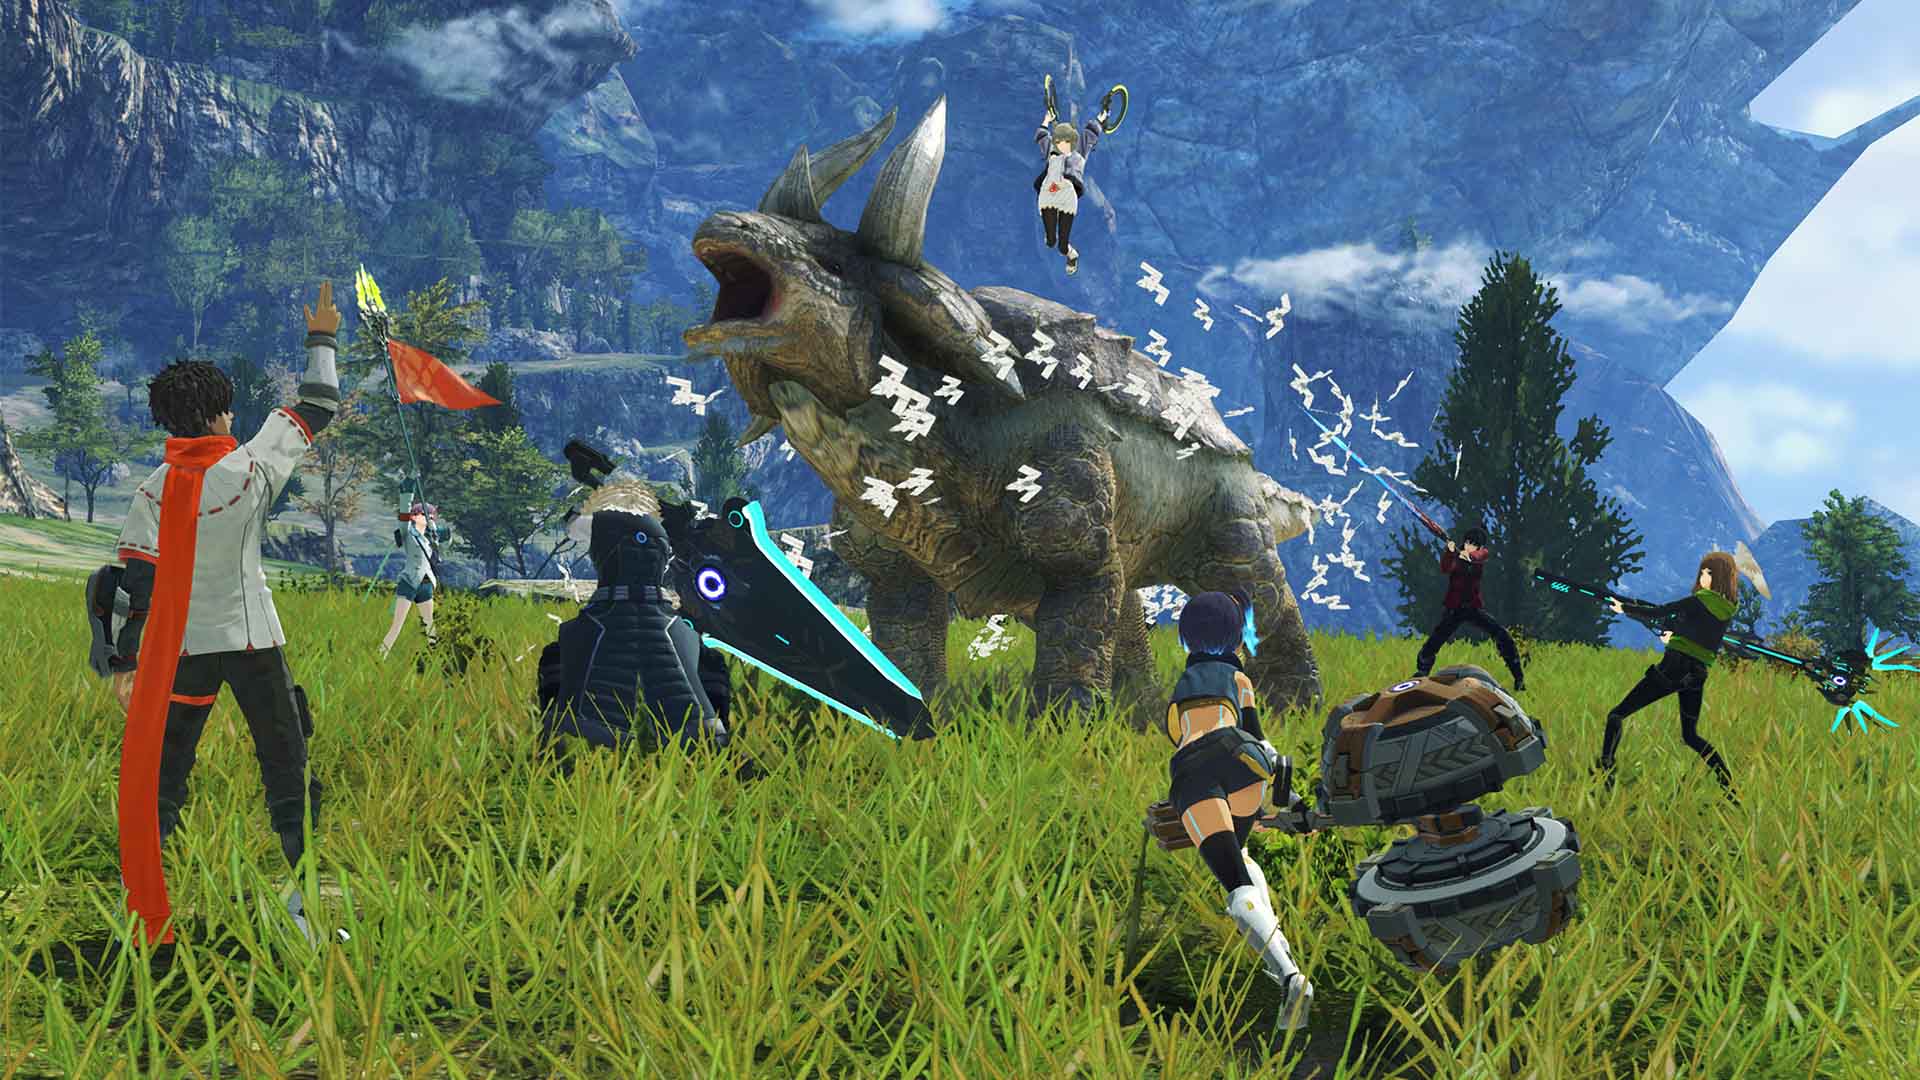 Xenoblade Chronicles 3 Update 1.2.0 Out for DLC Support This Oct. 14